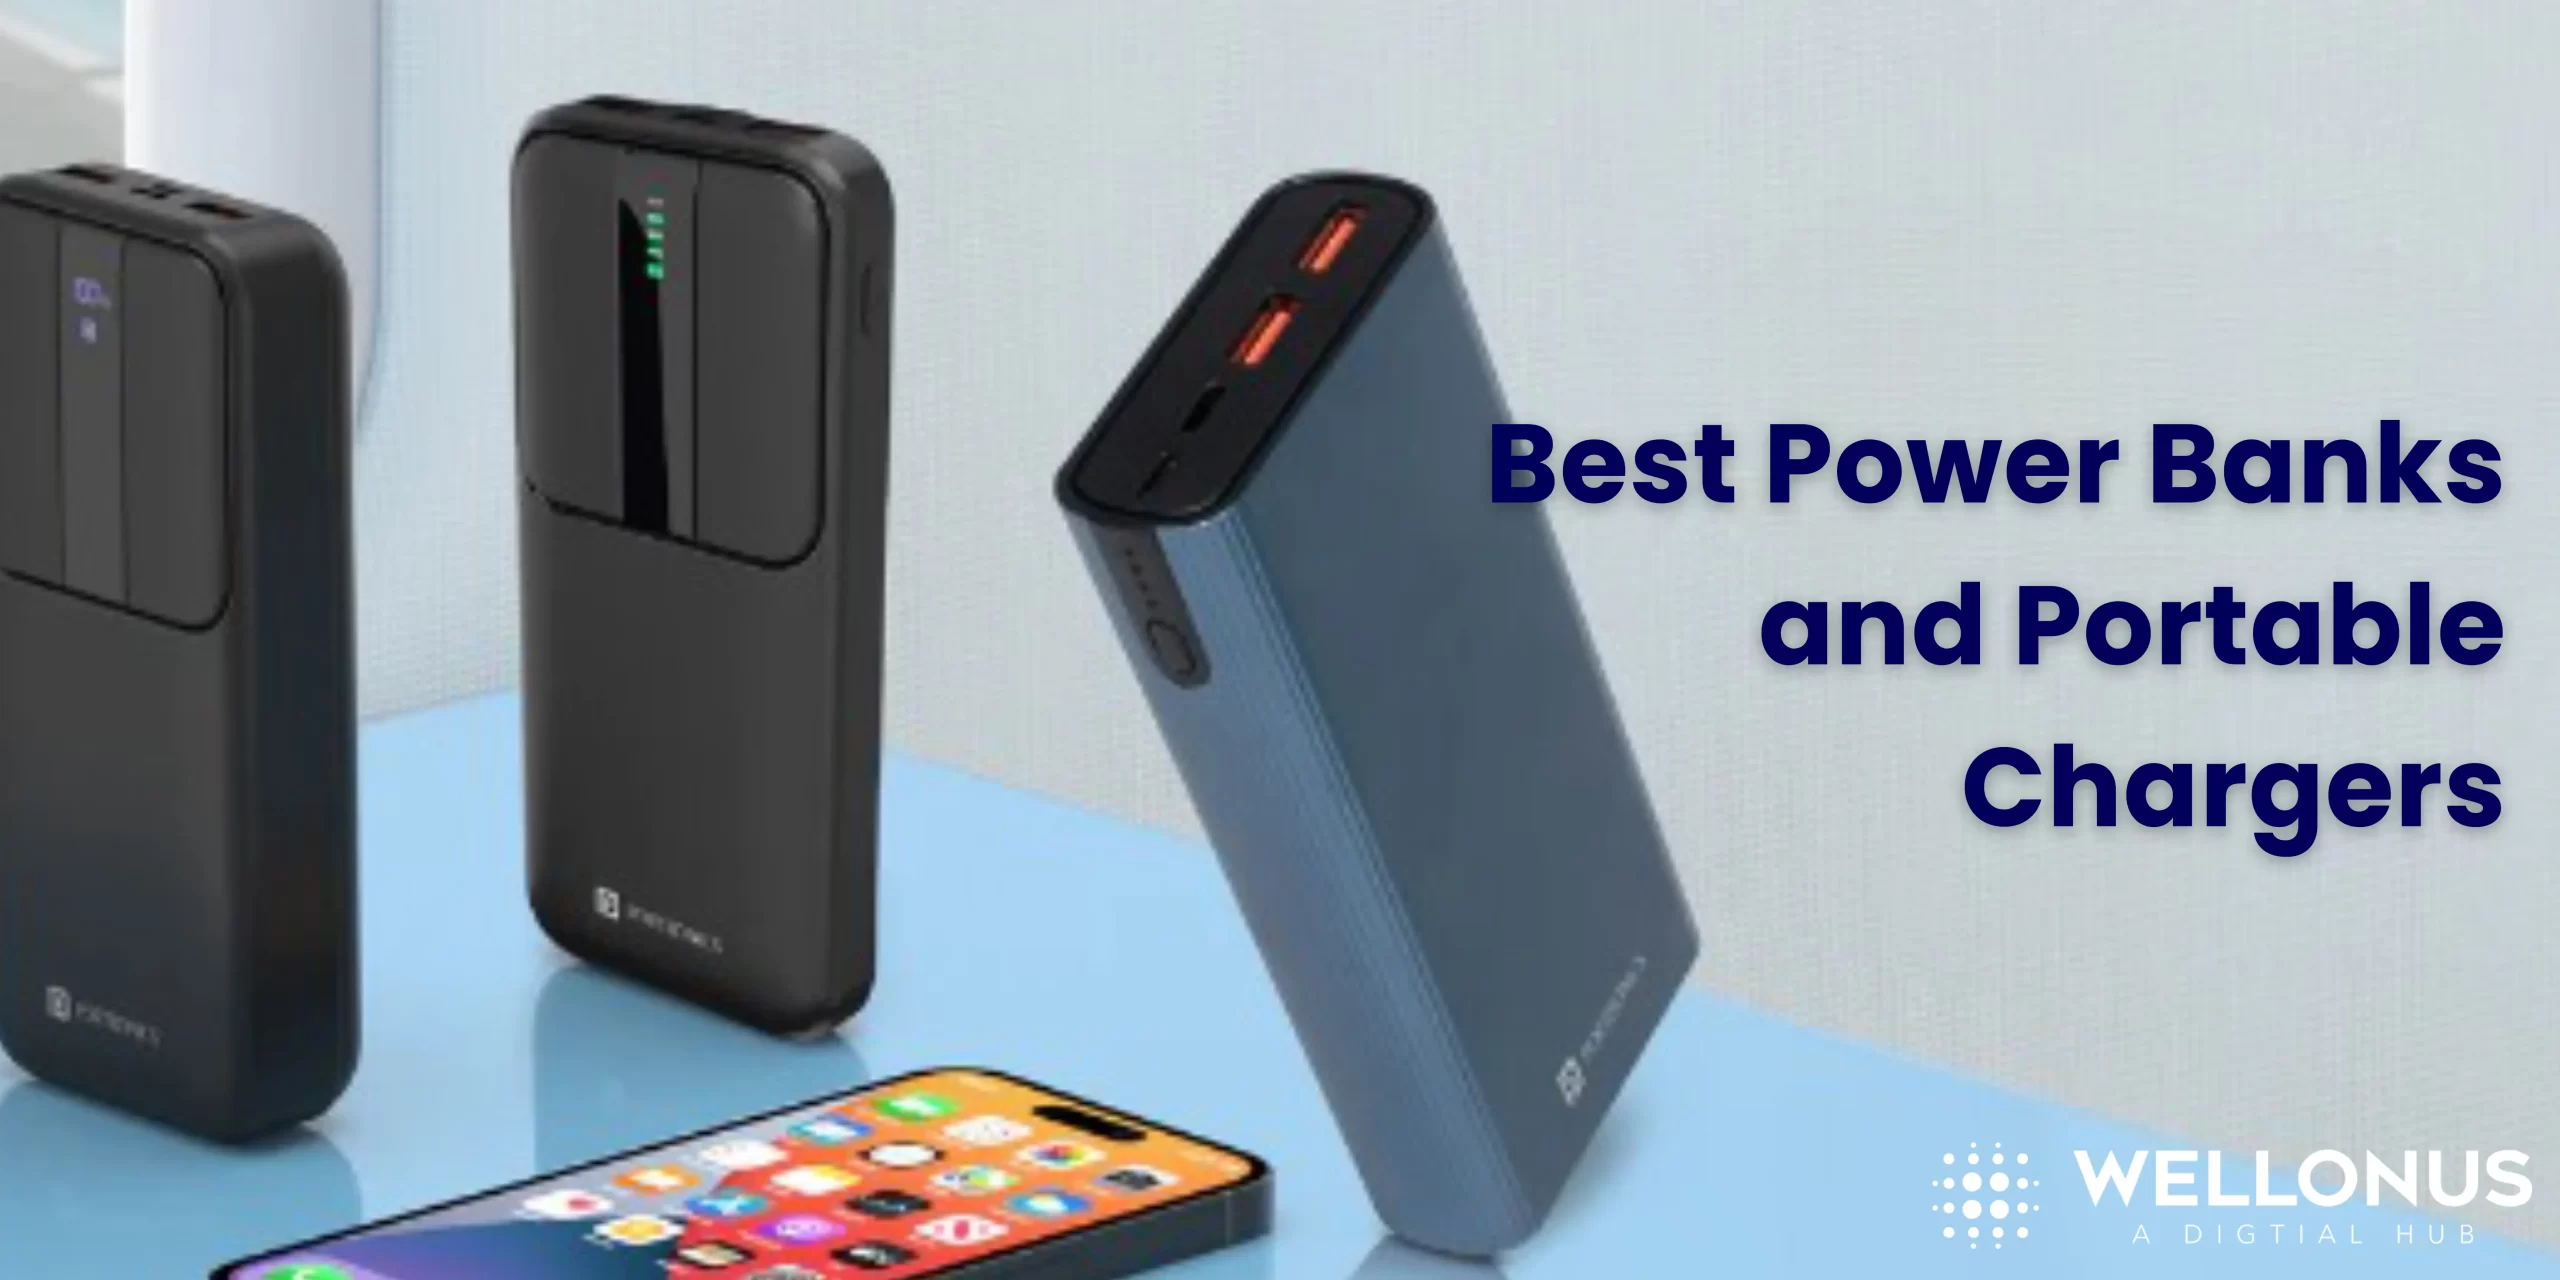 Best Power Banks and Portable Chargers